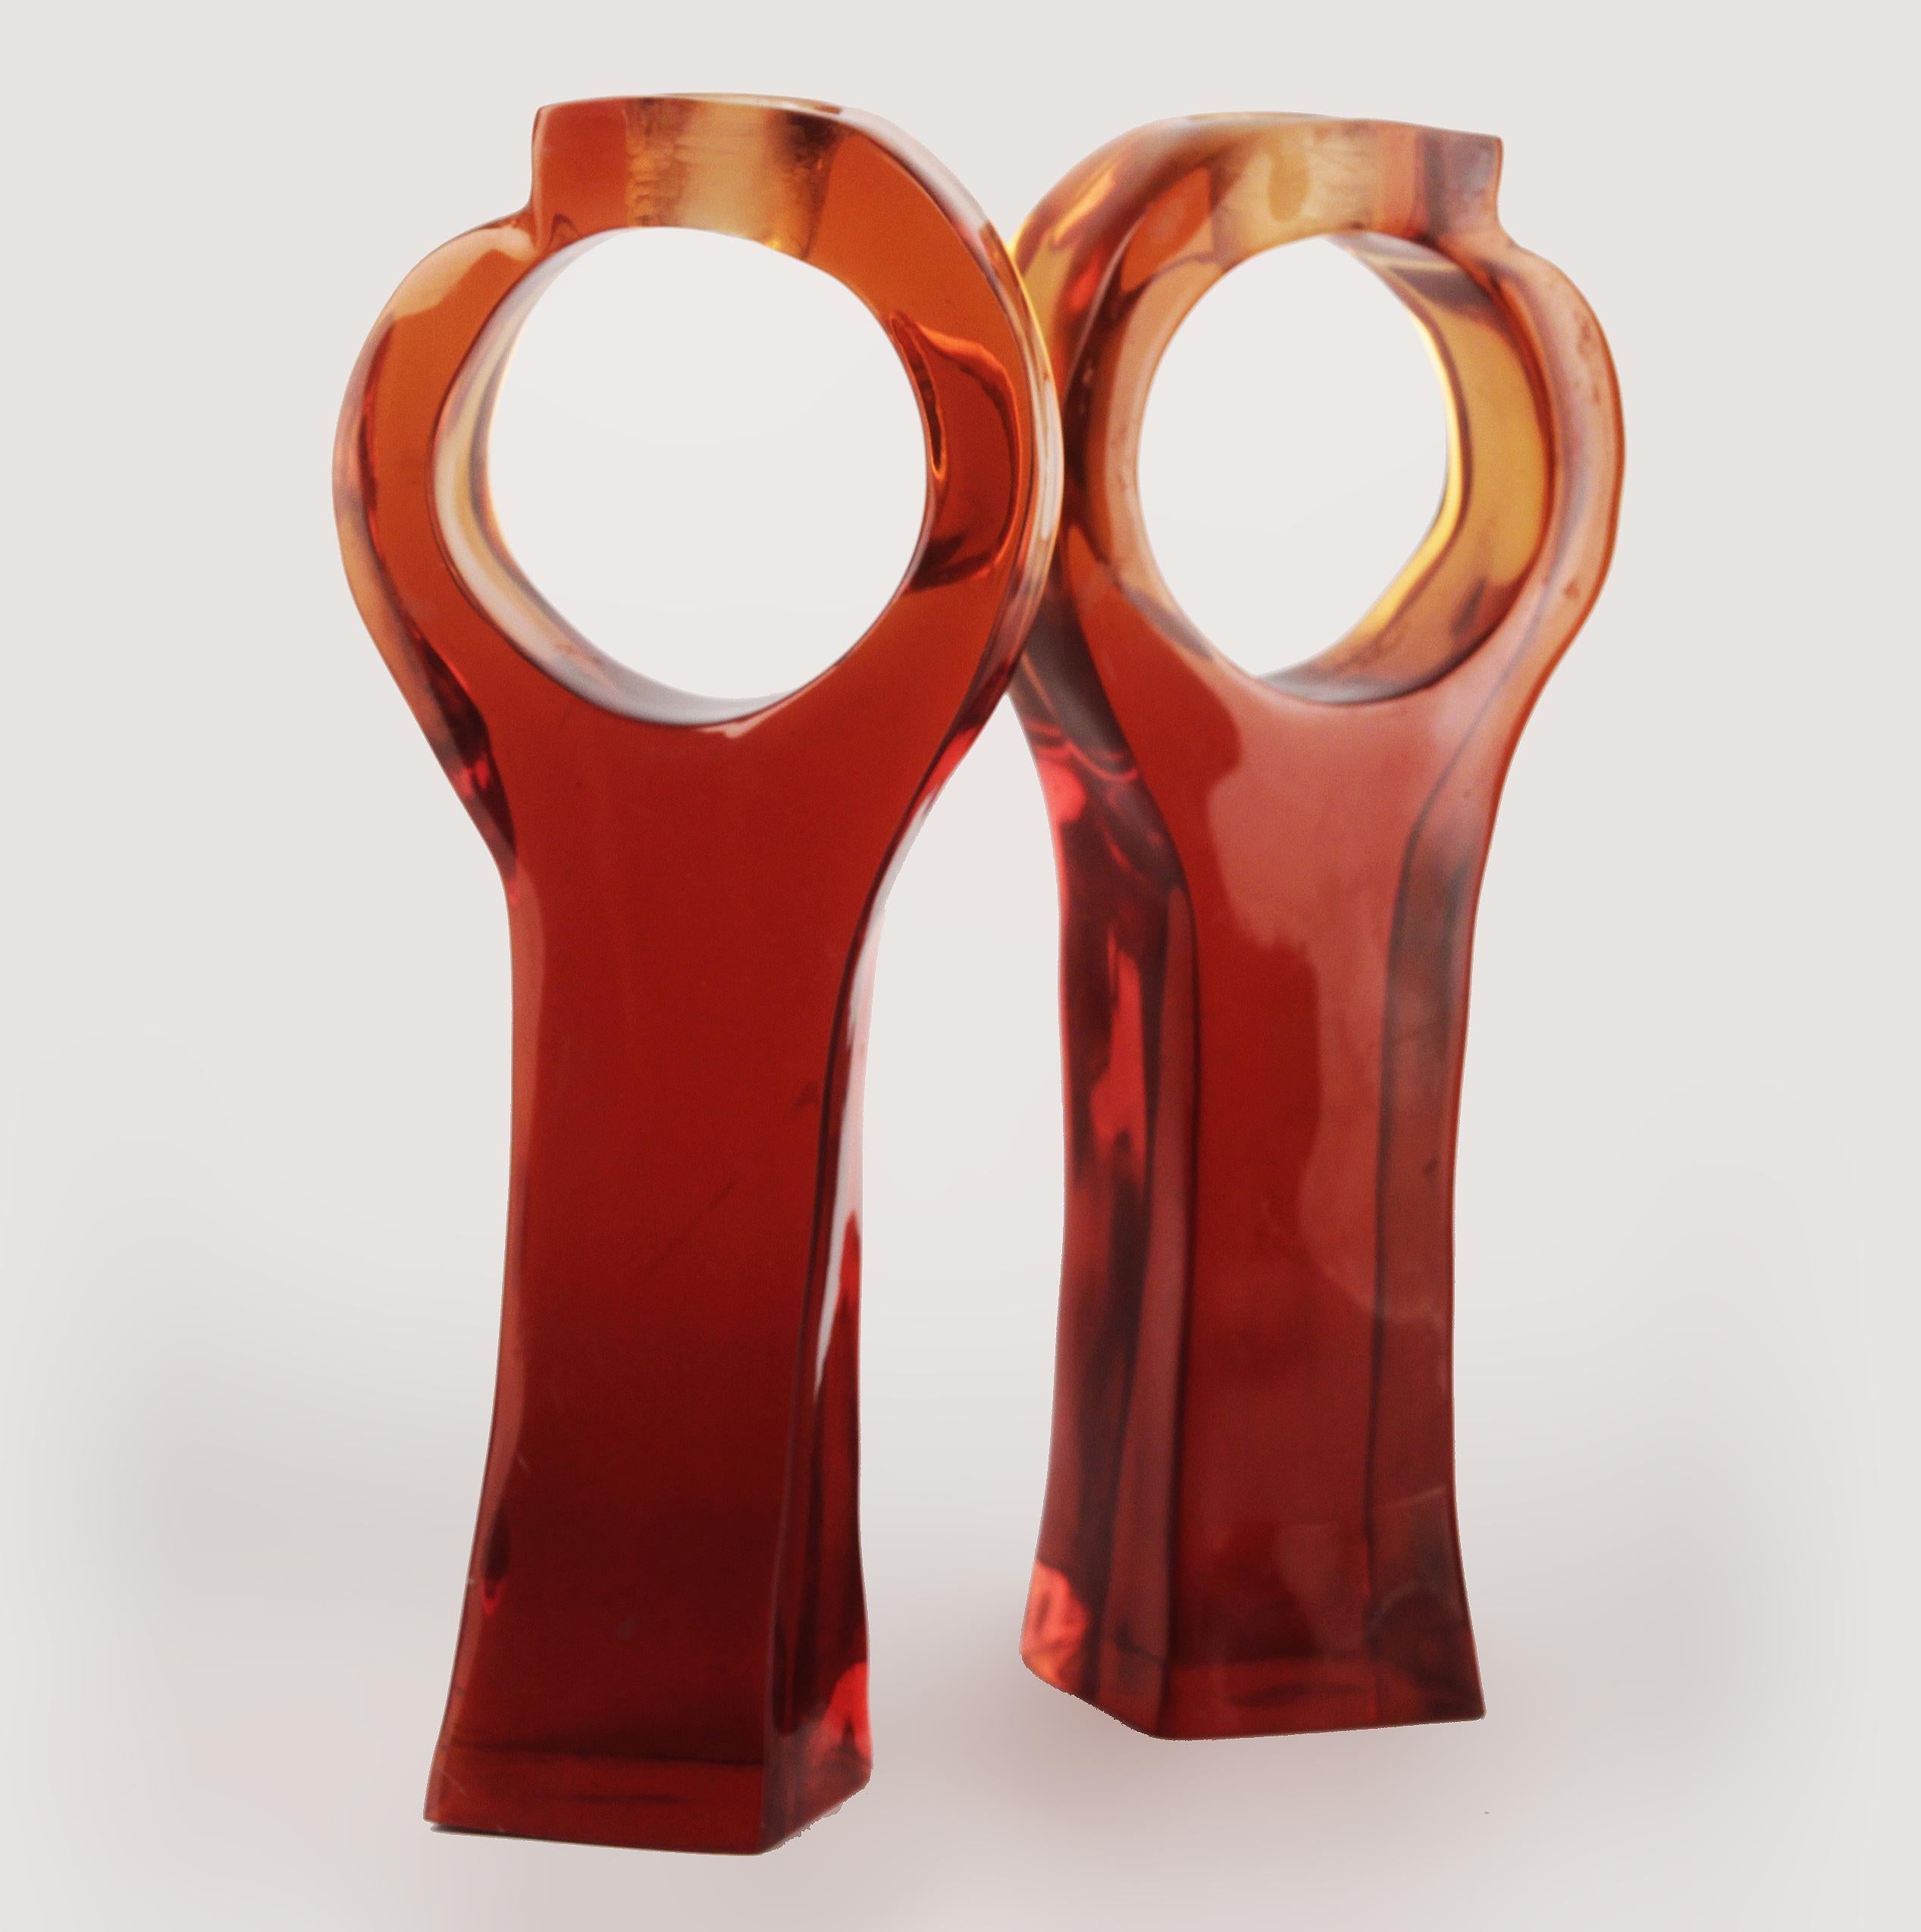 Pair of italian mid-century modern red acrylic/lucite geometric candle holders

By: unknown
Material: acrylic, lucite, synthetic, plastic
Technique: cast, molded, polished, hand-crafted
Dimensions: 3 in x 4.5 in x 11 in
Date: mid-20th century
Style: